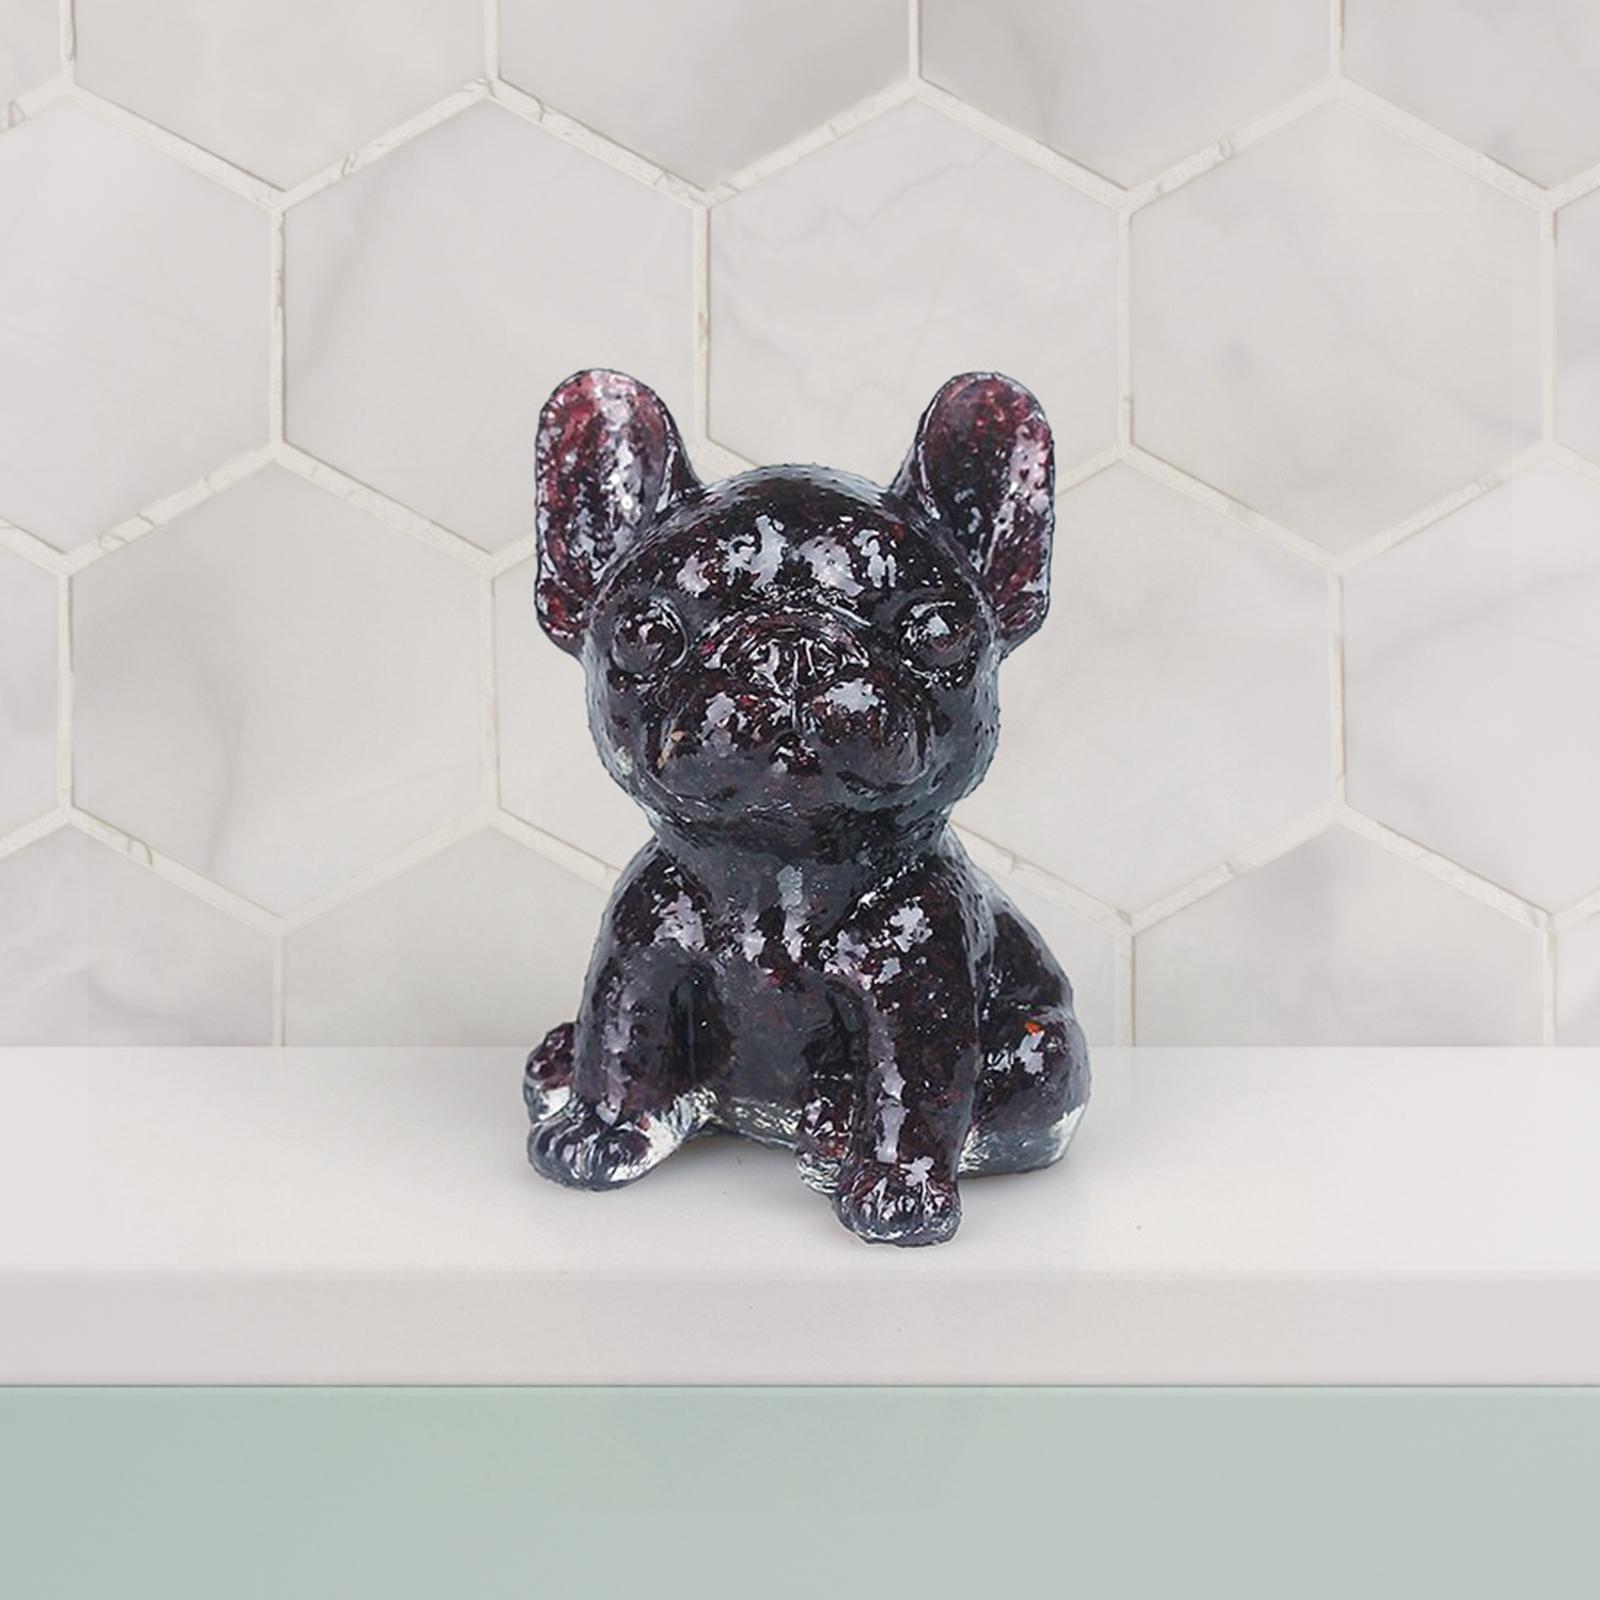 French Bulldog Figurine Ornament Small for Bedroom Desktop Collectible Dark Red